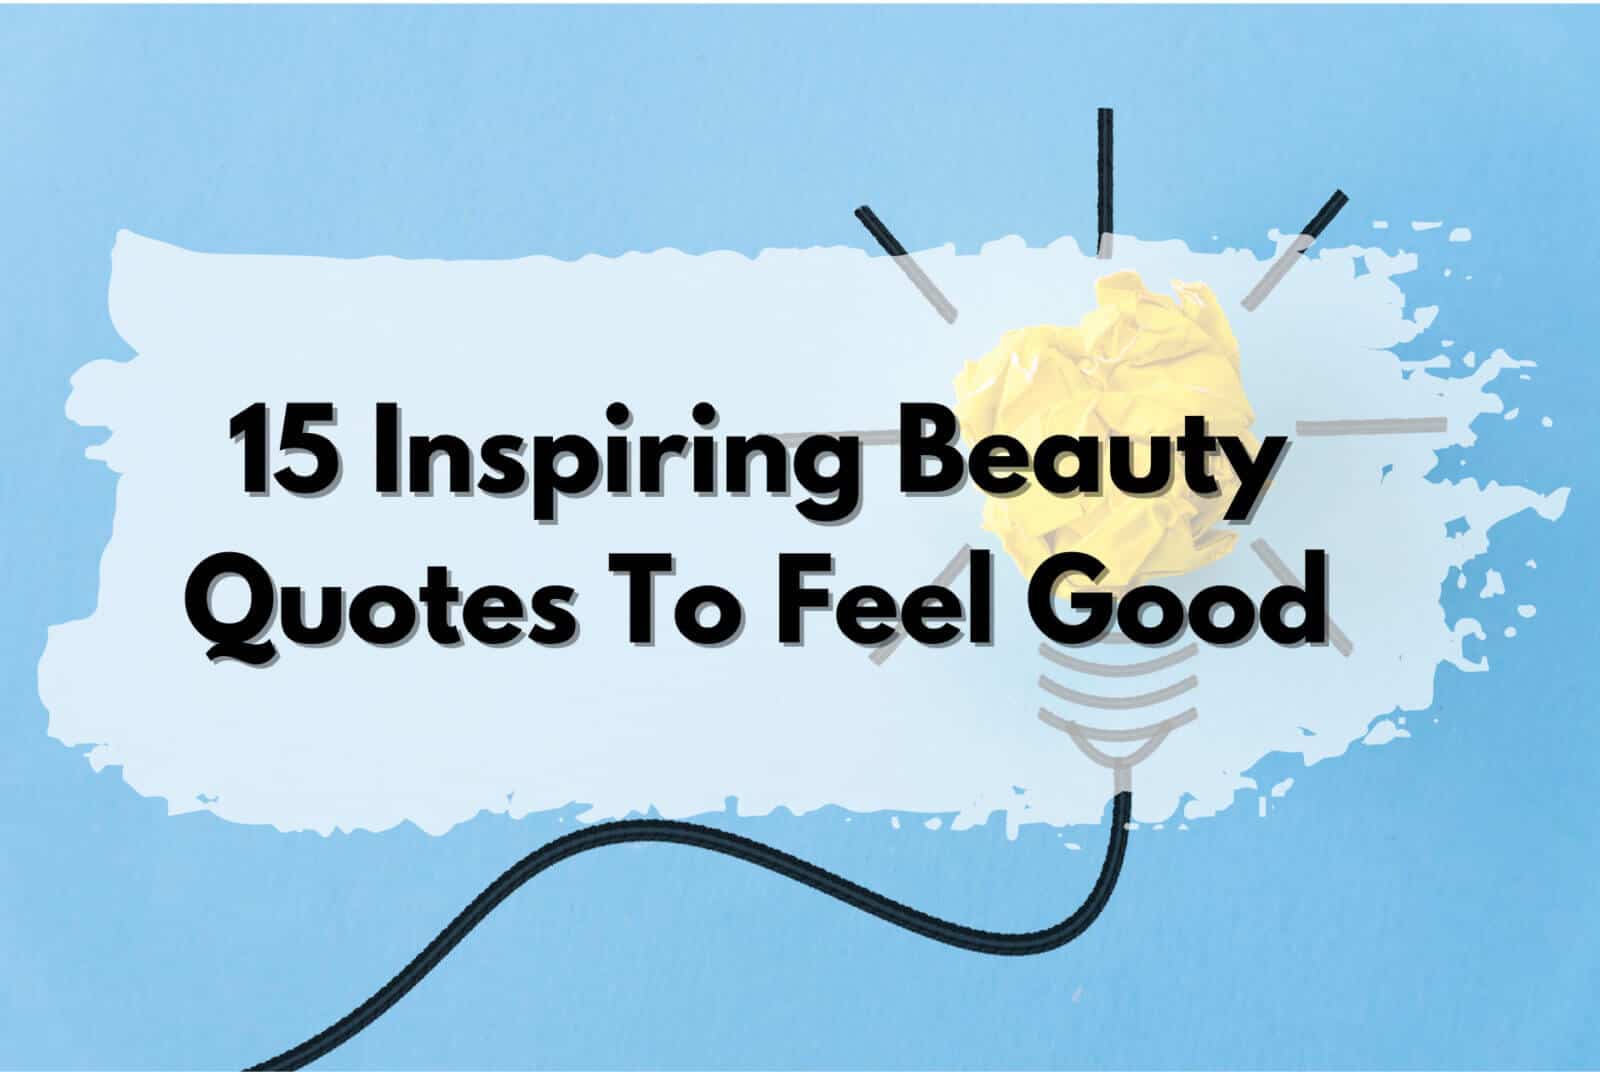 Inspiring beauty quotes that make you feel good.